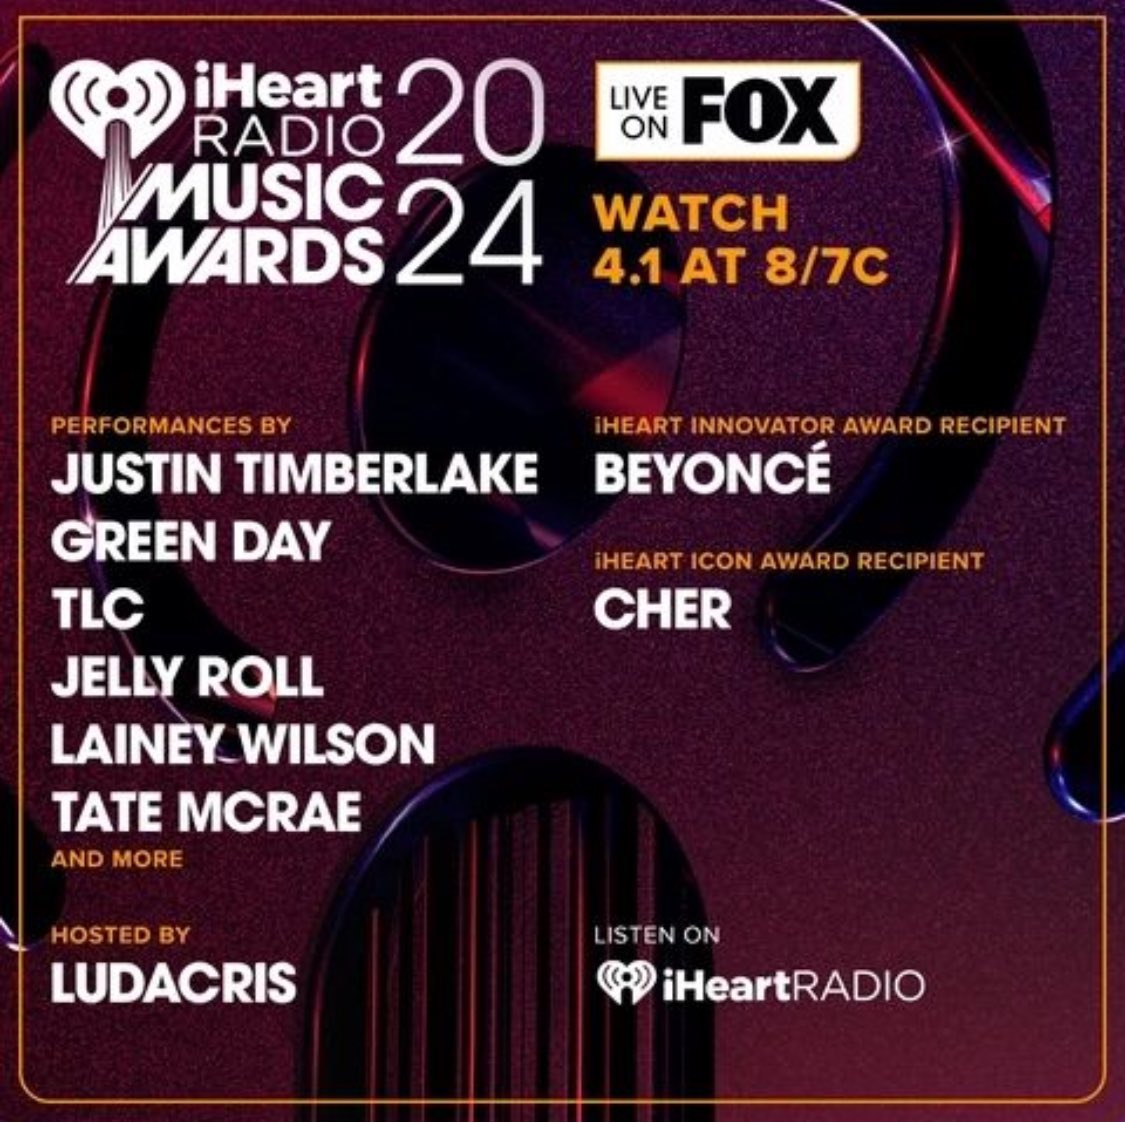 HAPPY #iHeartAwards2024!! 🌟Watch TONIGHT on @FOX29philly LIVE at 8/7c! 🖤 Who is excited to see #JustinTimberlake #TateMcRae #JellyRoll and more perform?! 🙌 Listen live on the @iheartradio app